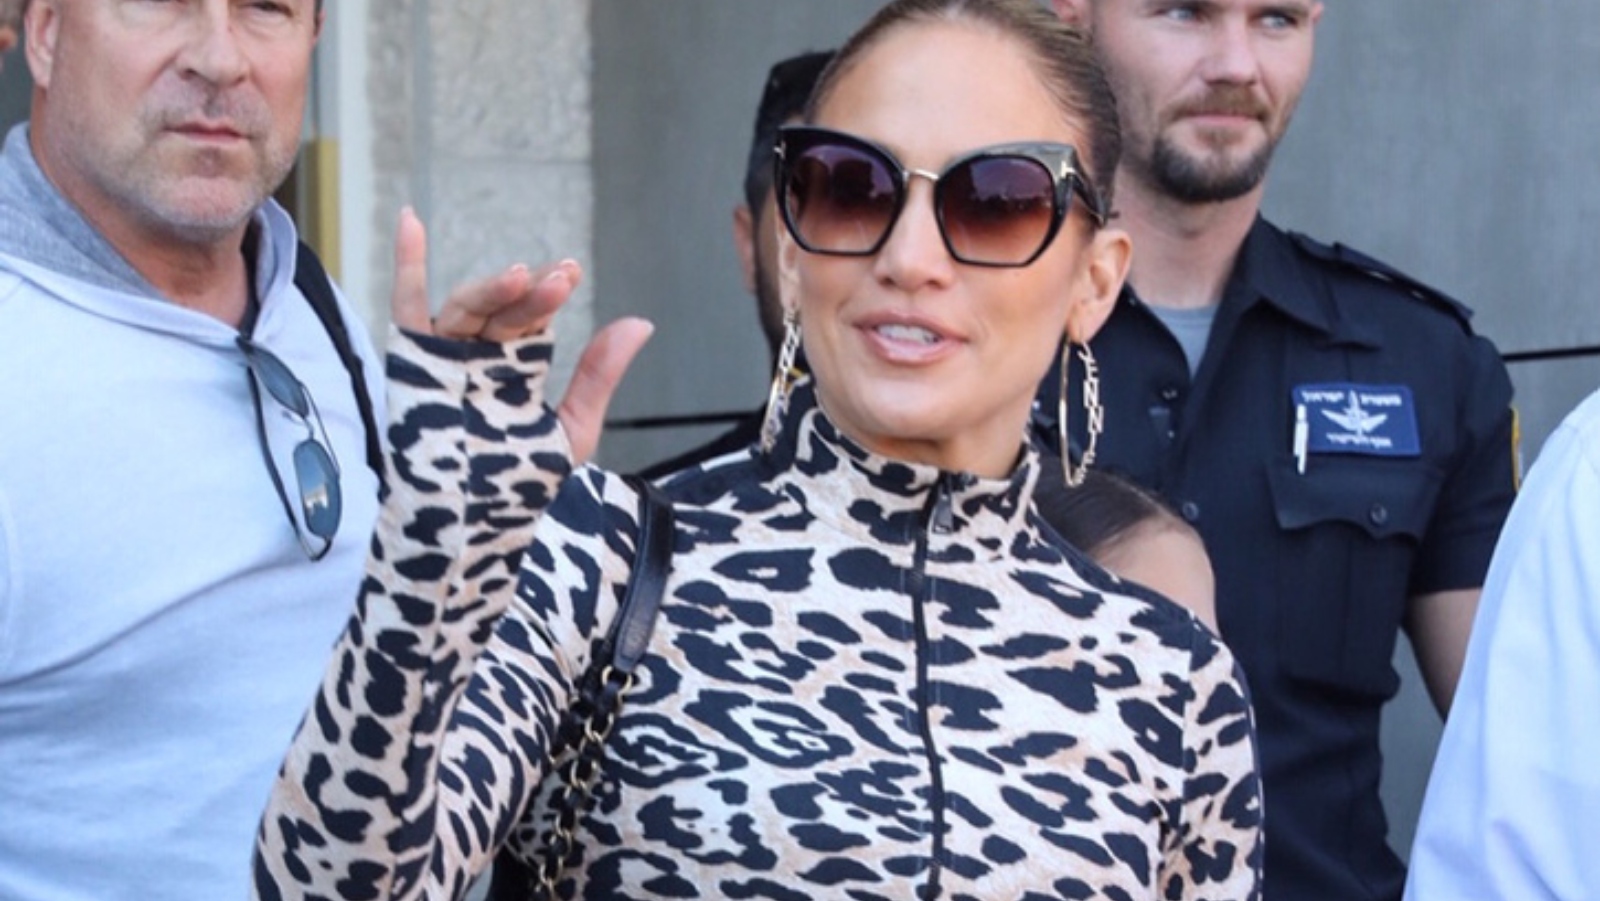 American actress and singer Jennifer Lopez arriving at the Ben-Gurion International Airport ahead of her concert in Tel Aviv on August 1, 2019. Photo by FLASH90